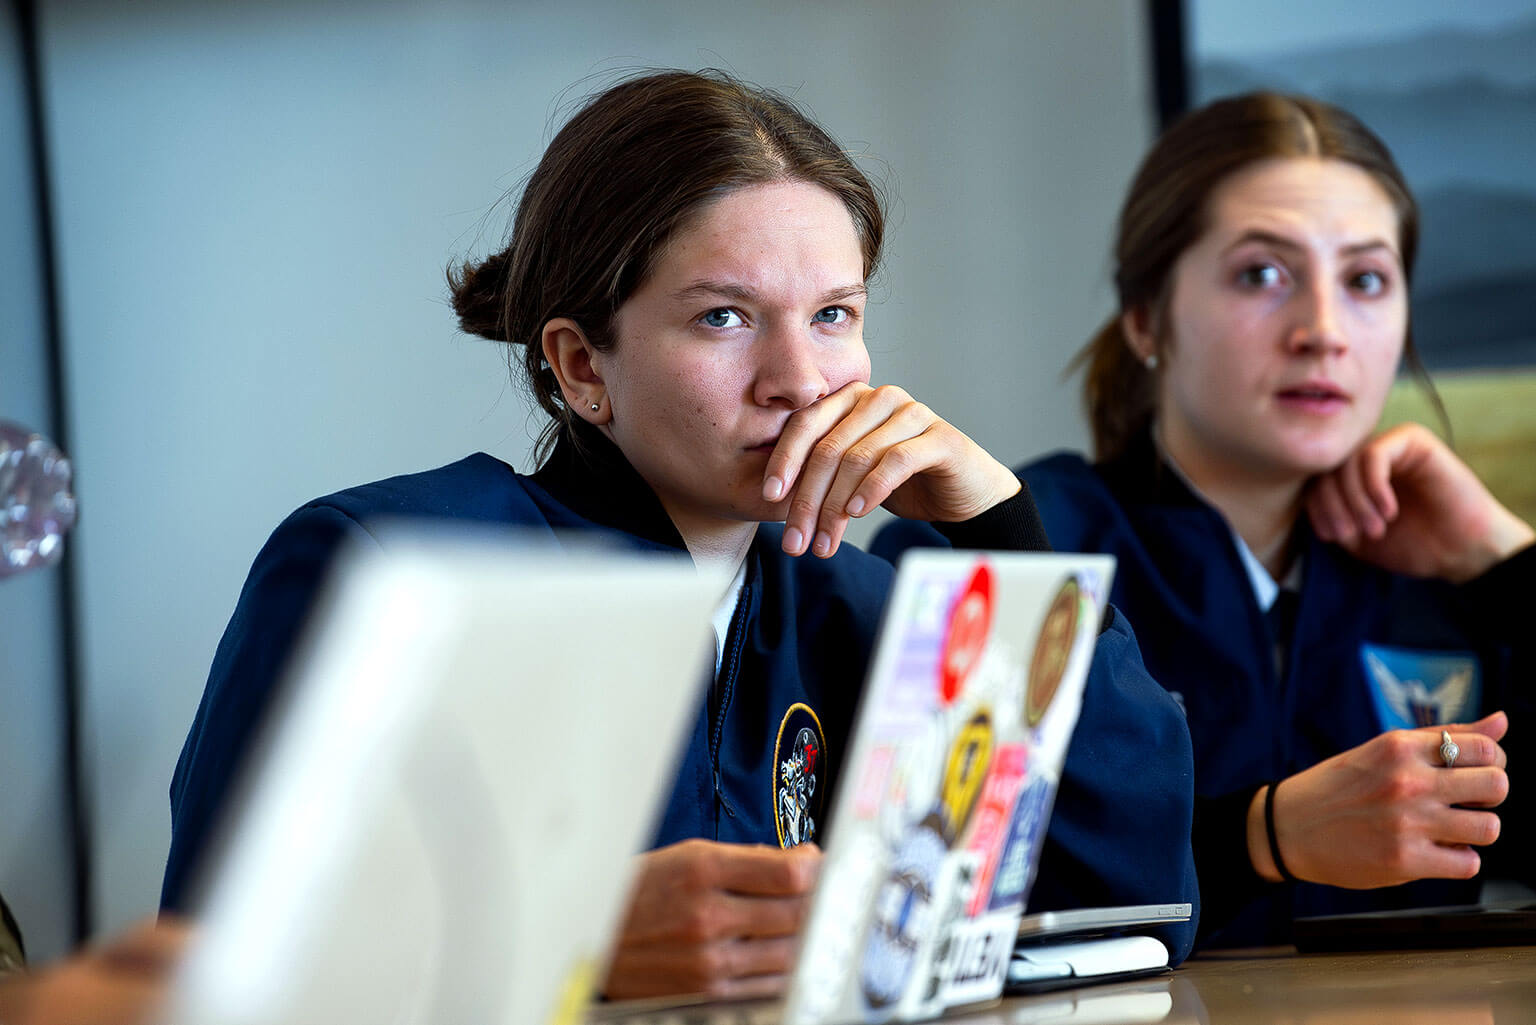 Cadet 2nd Class Alyssa Hargis, left, and Cadet 1st Class Olivia Hommes, consider options for a proposed solution to their team’s problem in the U.S. Air Force Academy’s “Reflecting on Wicked Problems” capstone course.